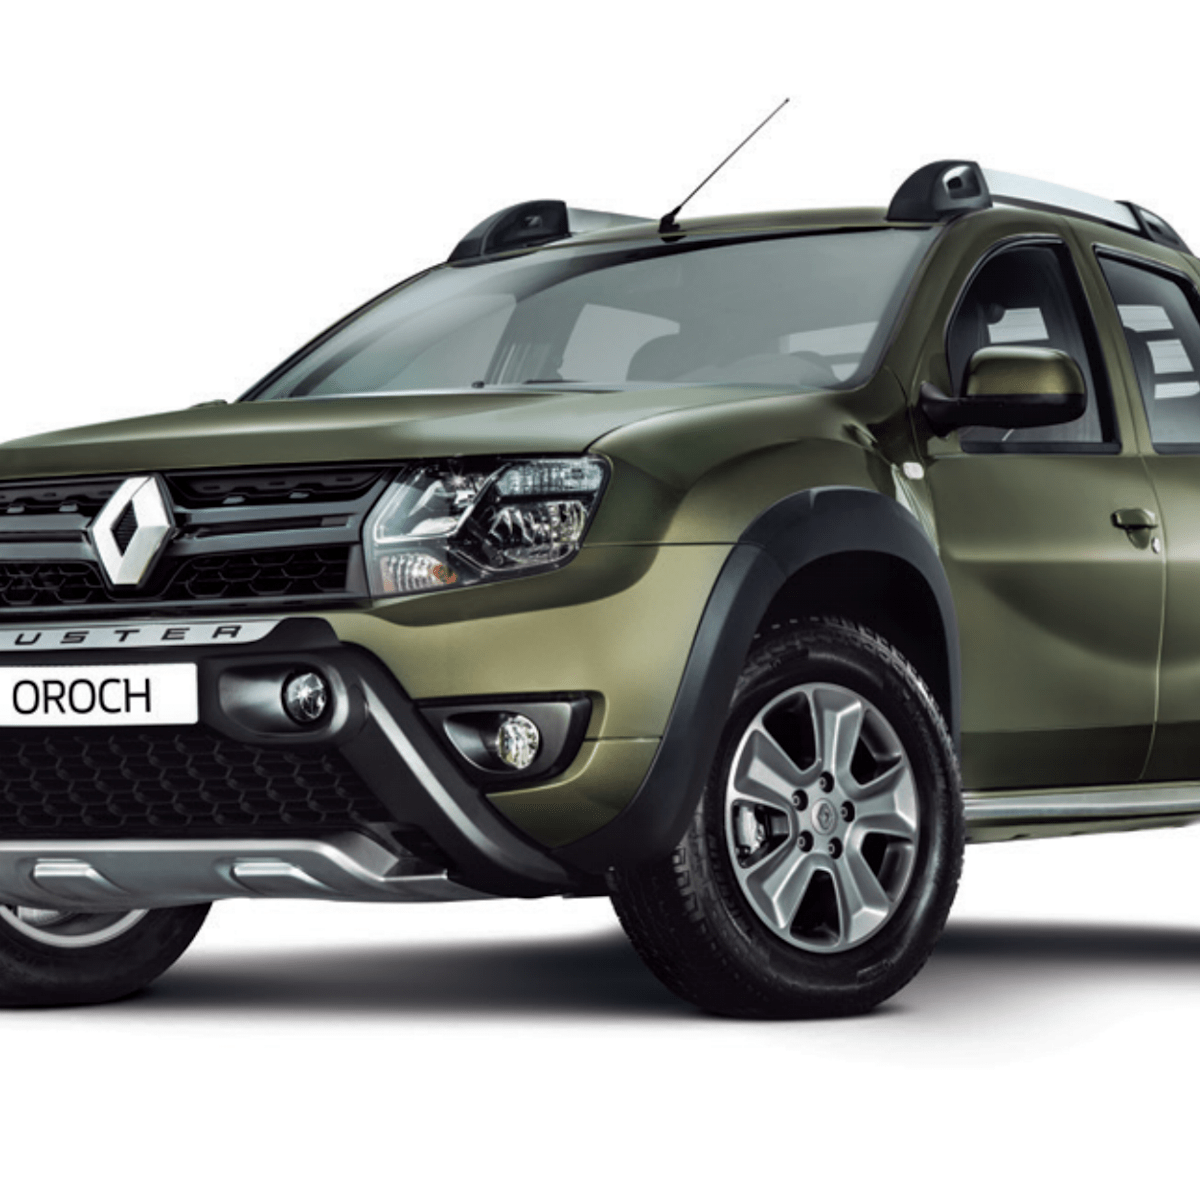 Renault Duster 2017. Renault Oroch 2022. Рено Дастер Ороч. Renault Duster Oroch 2021.